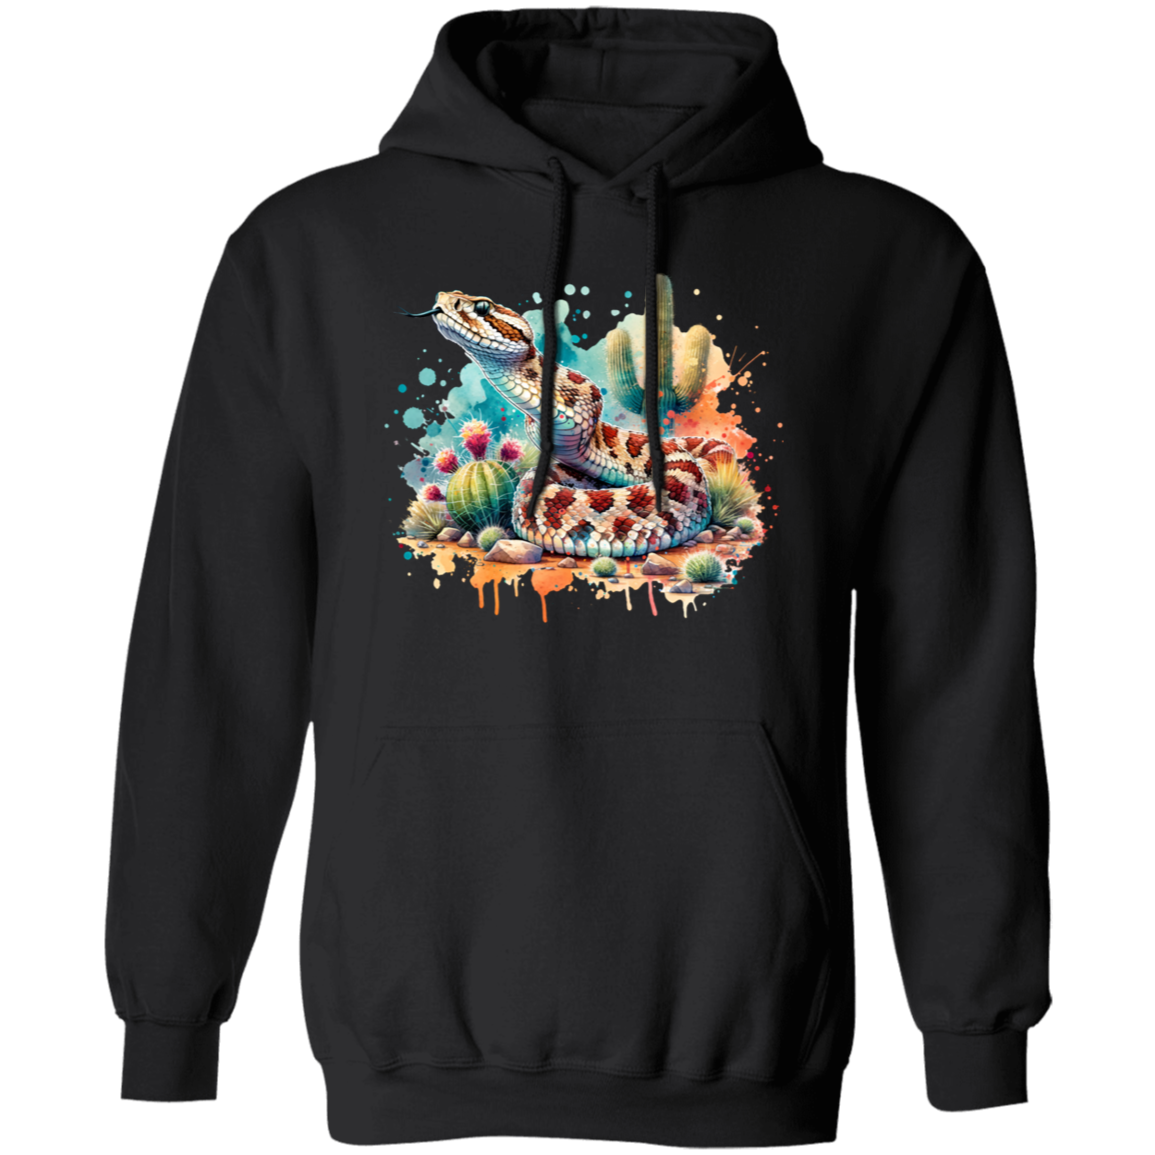 Rattlesnake Scenting the Air - T-shirts, Hoodies and Sweatshirts